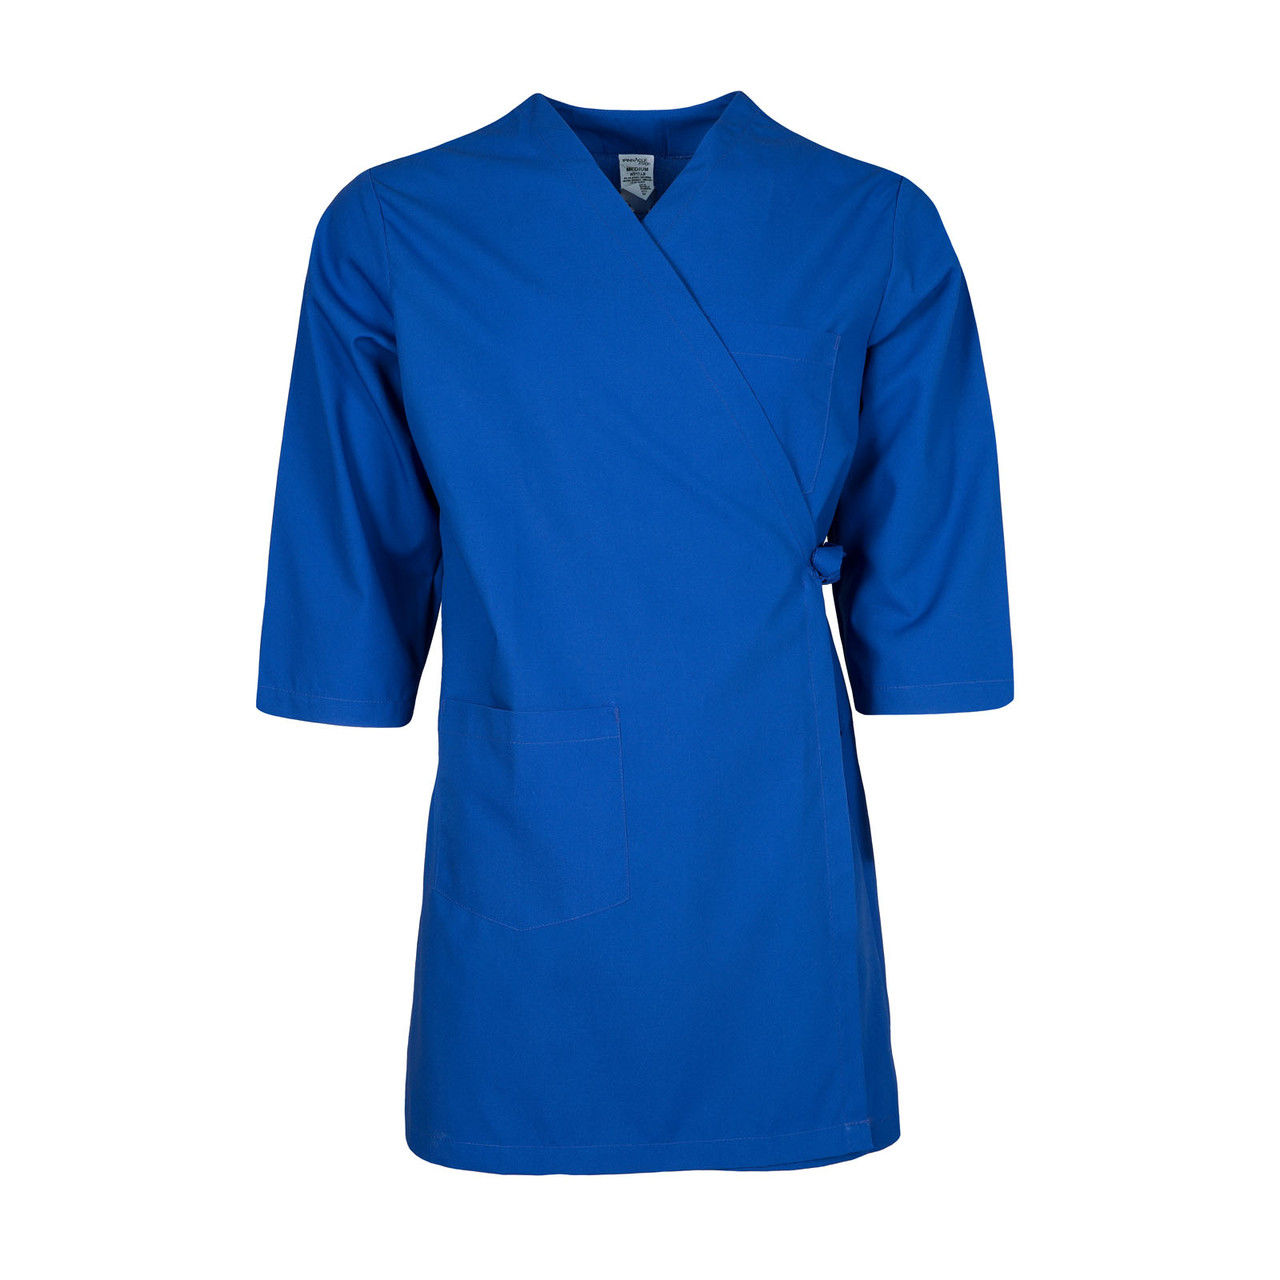 How many pockets does the Royal Blue Wraparound Smock Gown have?